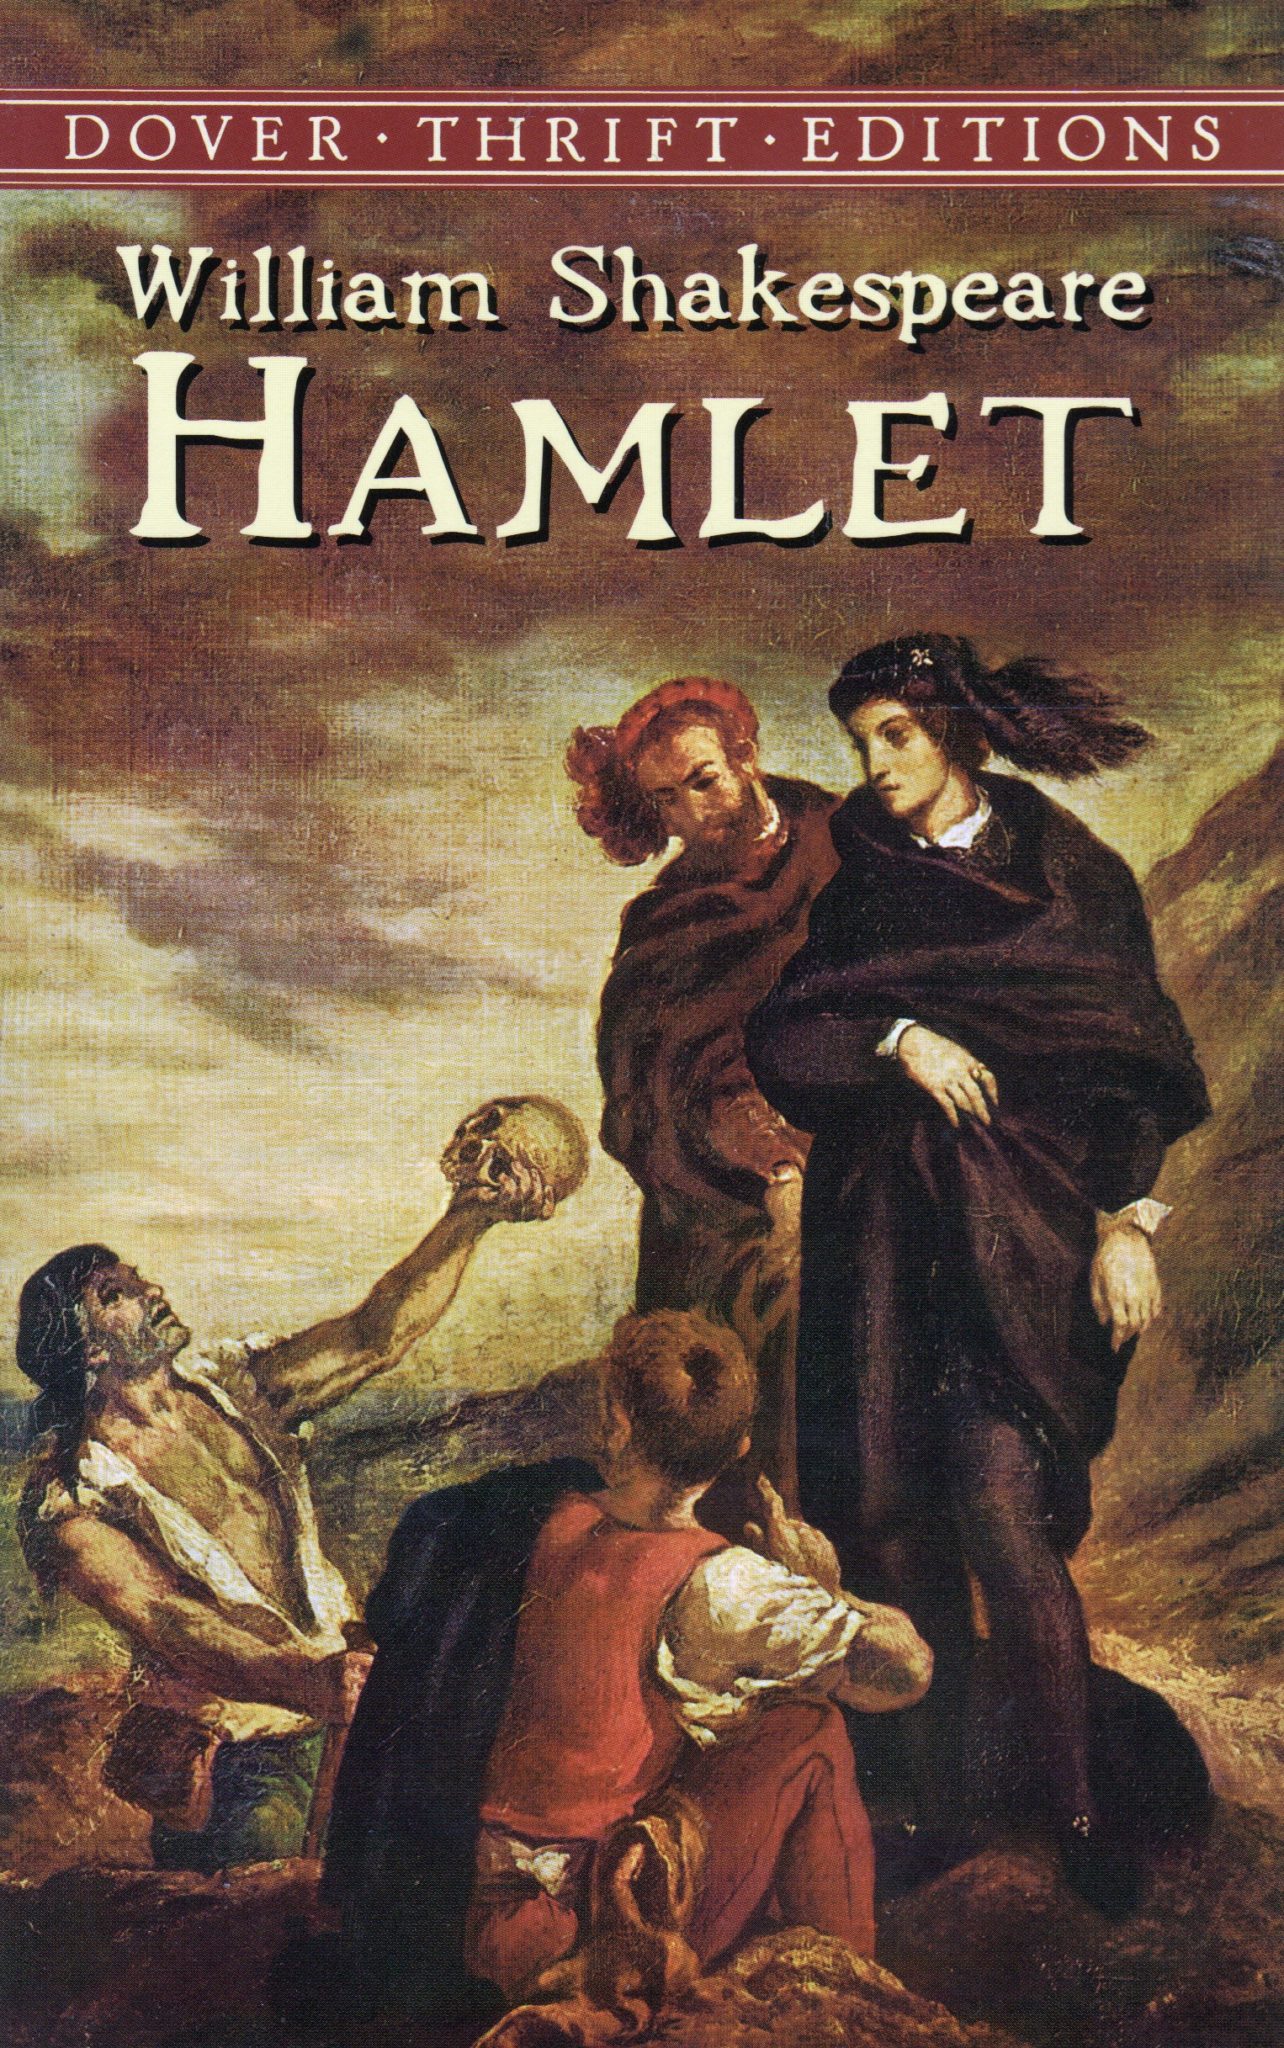 research work on hamlet